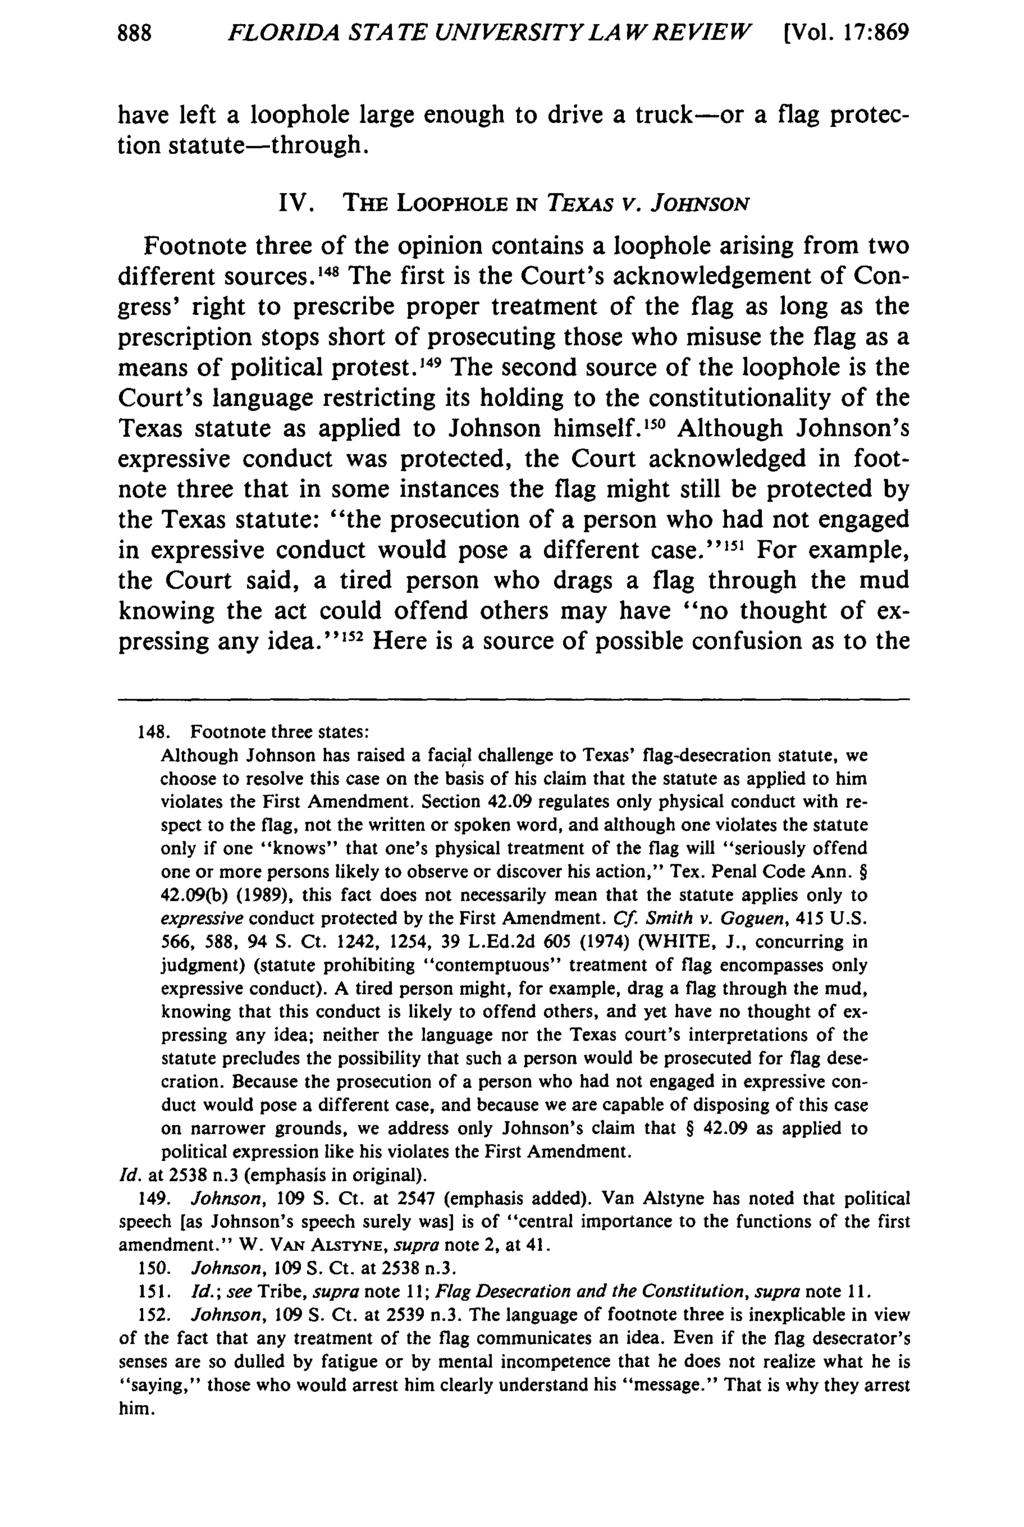 888 FLORIDA STATE UNIVERSITY LAW REVIEW [Vol. 17:869 have left a loophole large enough to drive a truck-or a flag protection statute-through. IV. THE LOOPHOLE IN TExAs v.